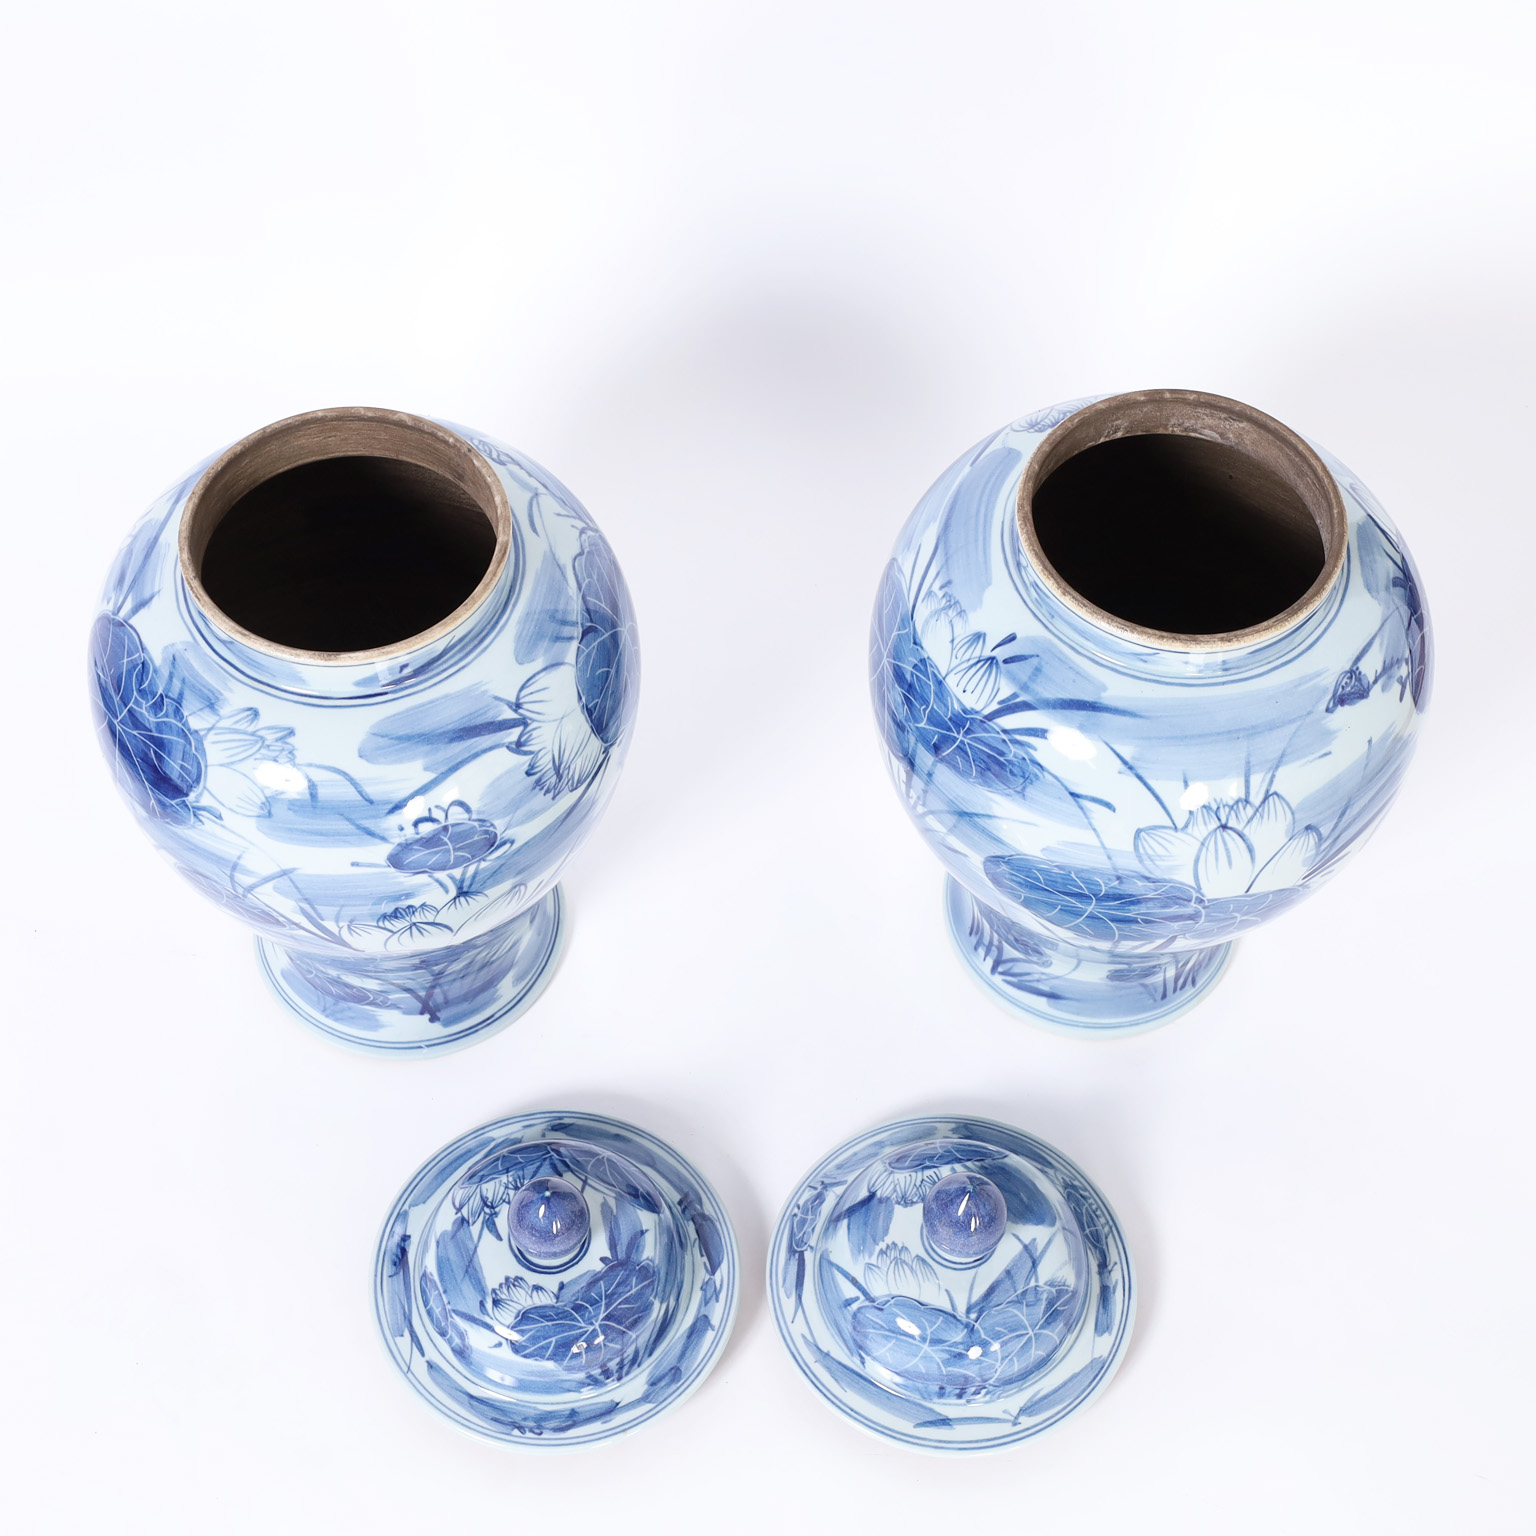 Pair of Chinese Blue and White Porcelain Lidded Urns with Lilies